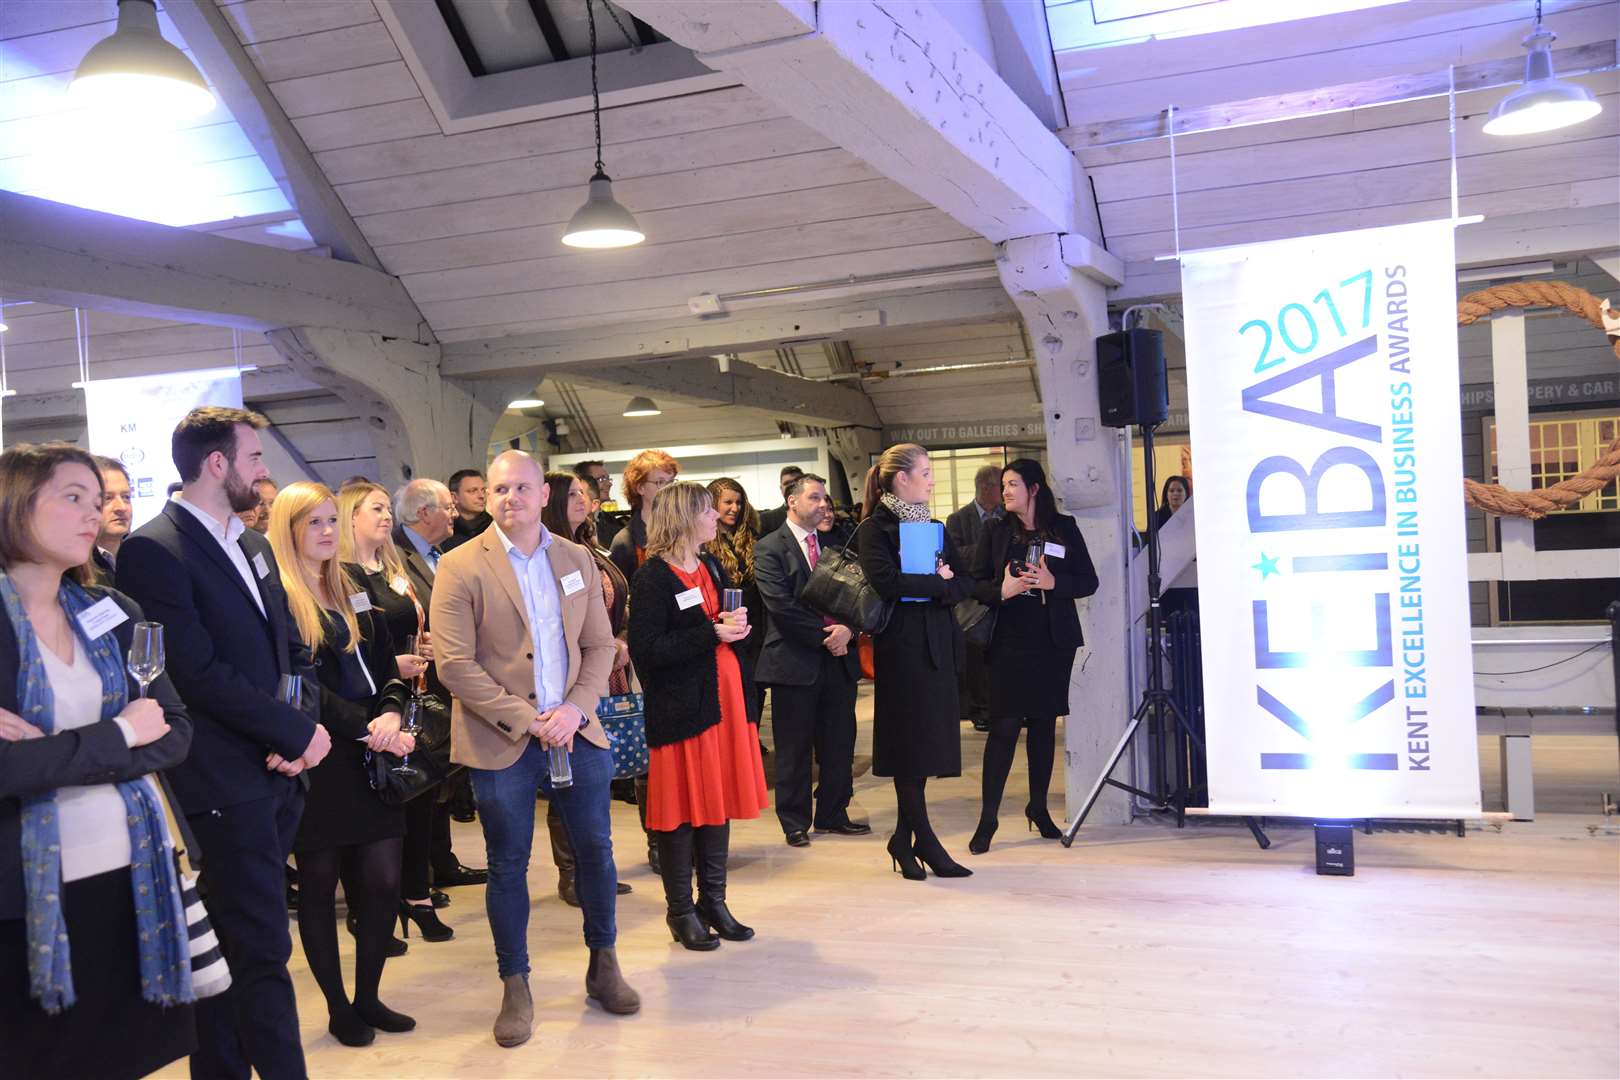 Dozens of guests braved the snowy conditions to attend the launch of KEiBA 2017